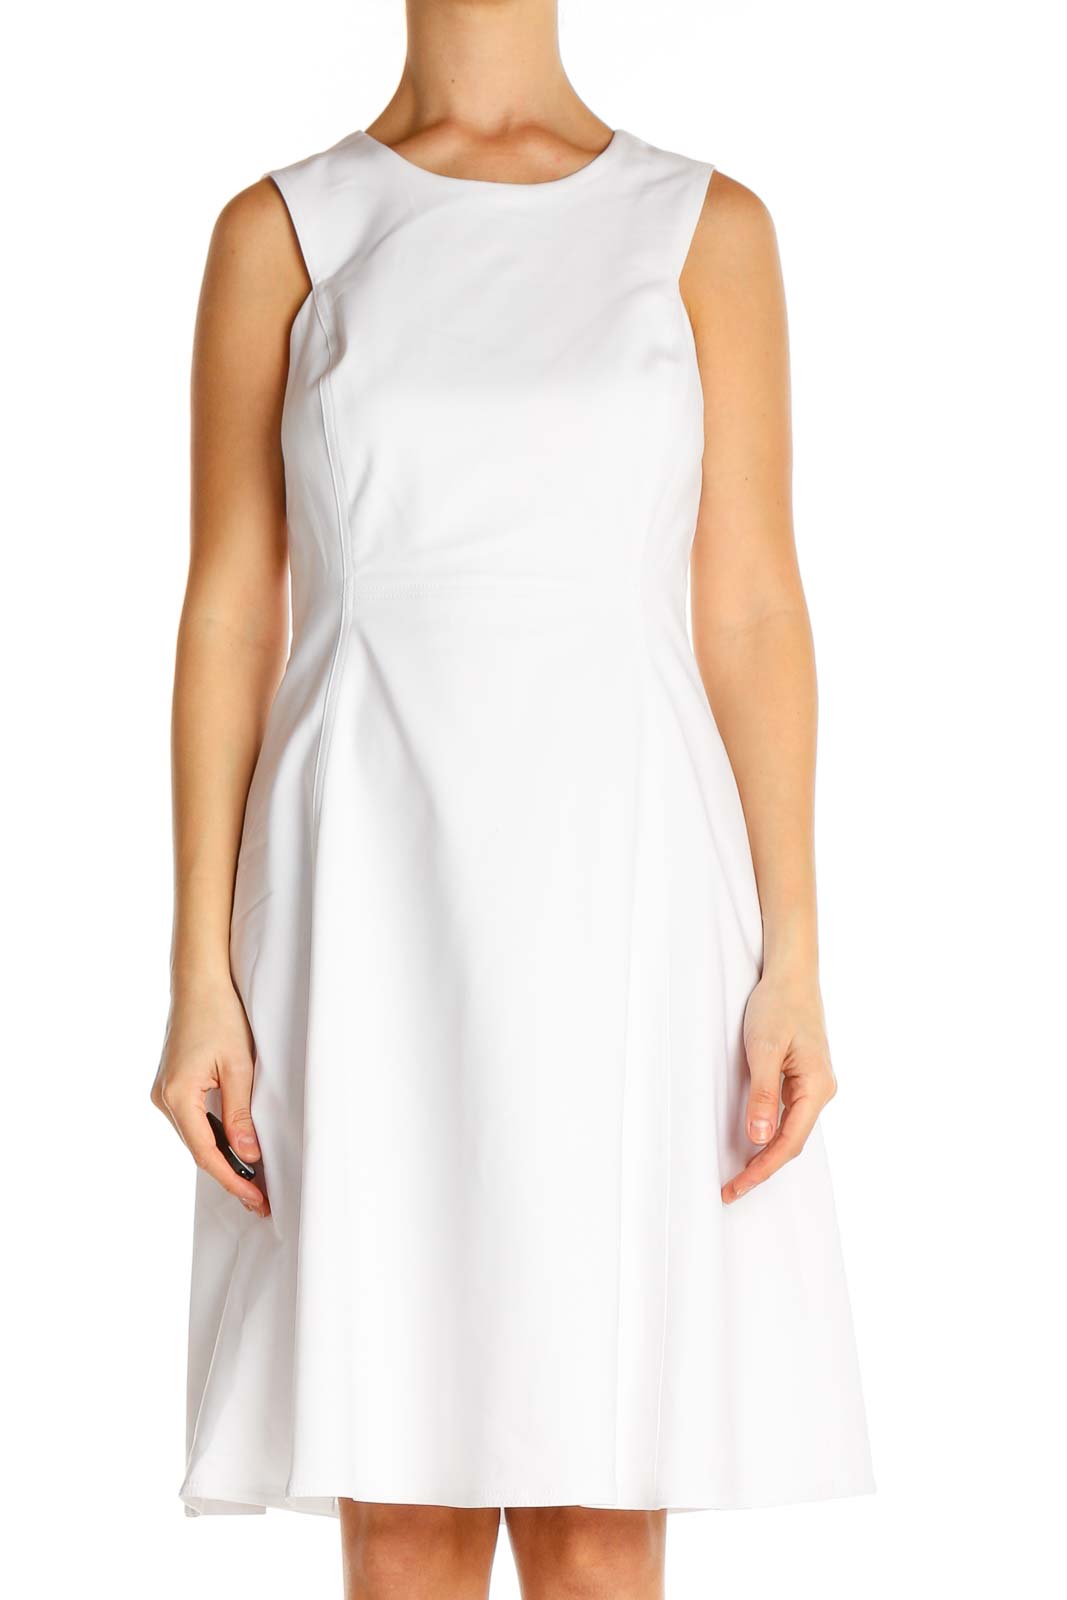 Calvin Klein - White Solid Classic Fit & Flare Dress Polyester Cotton ...